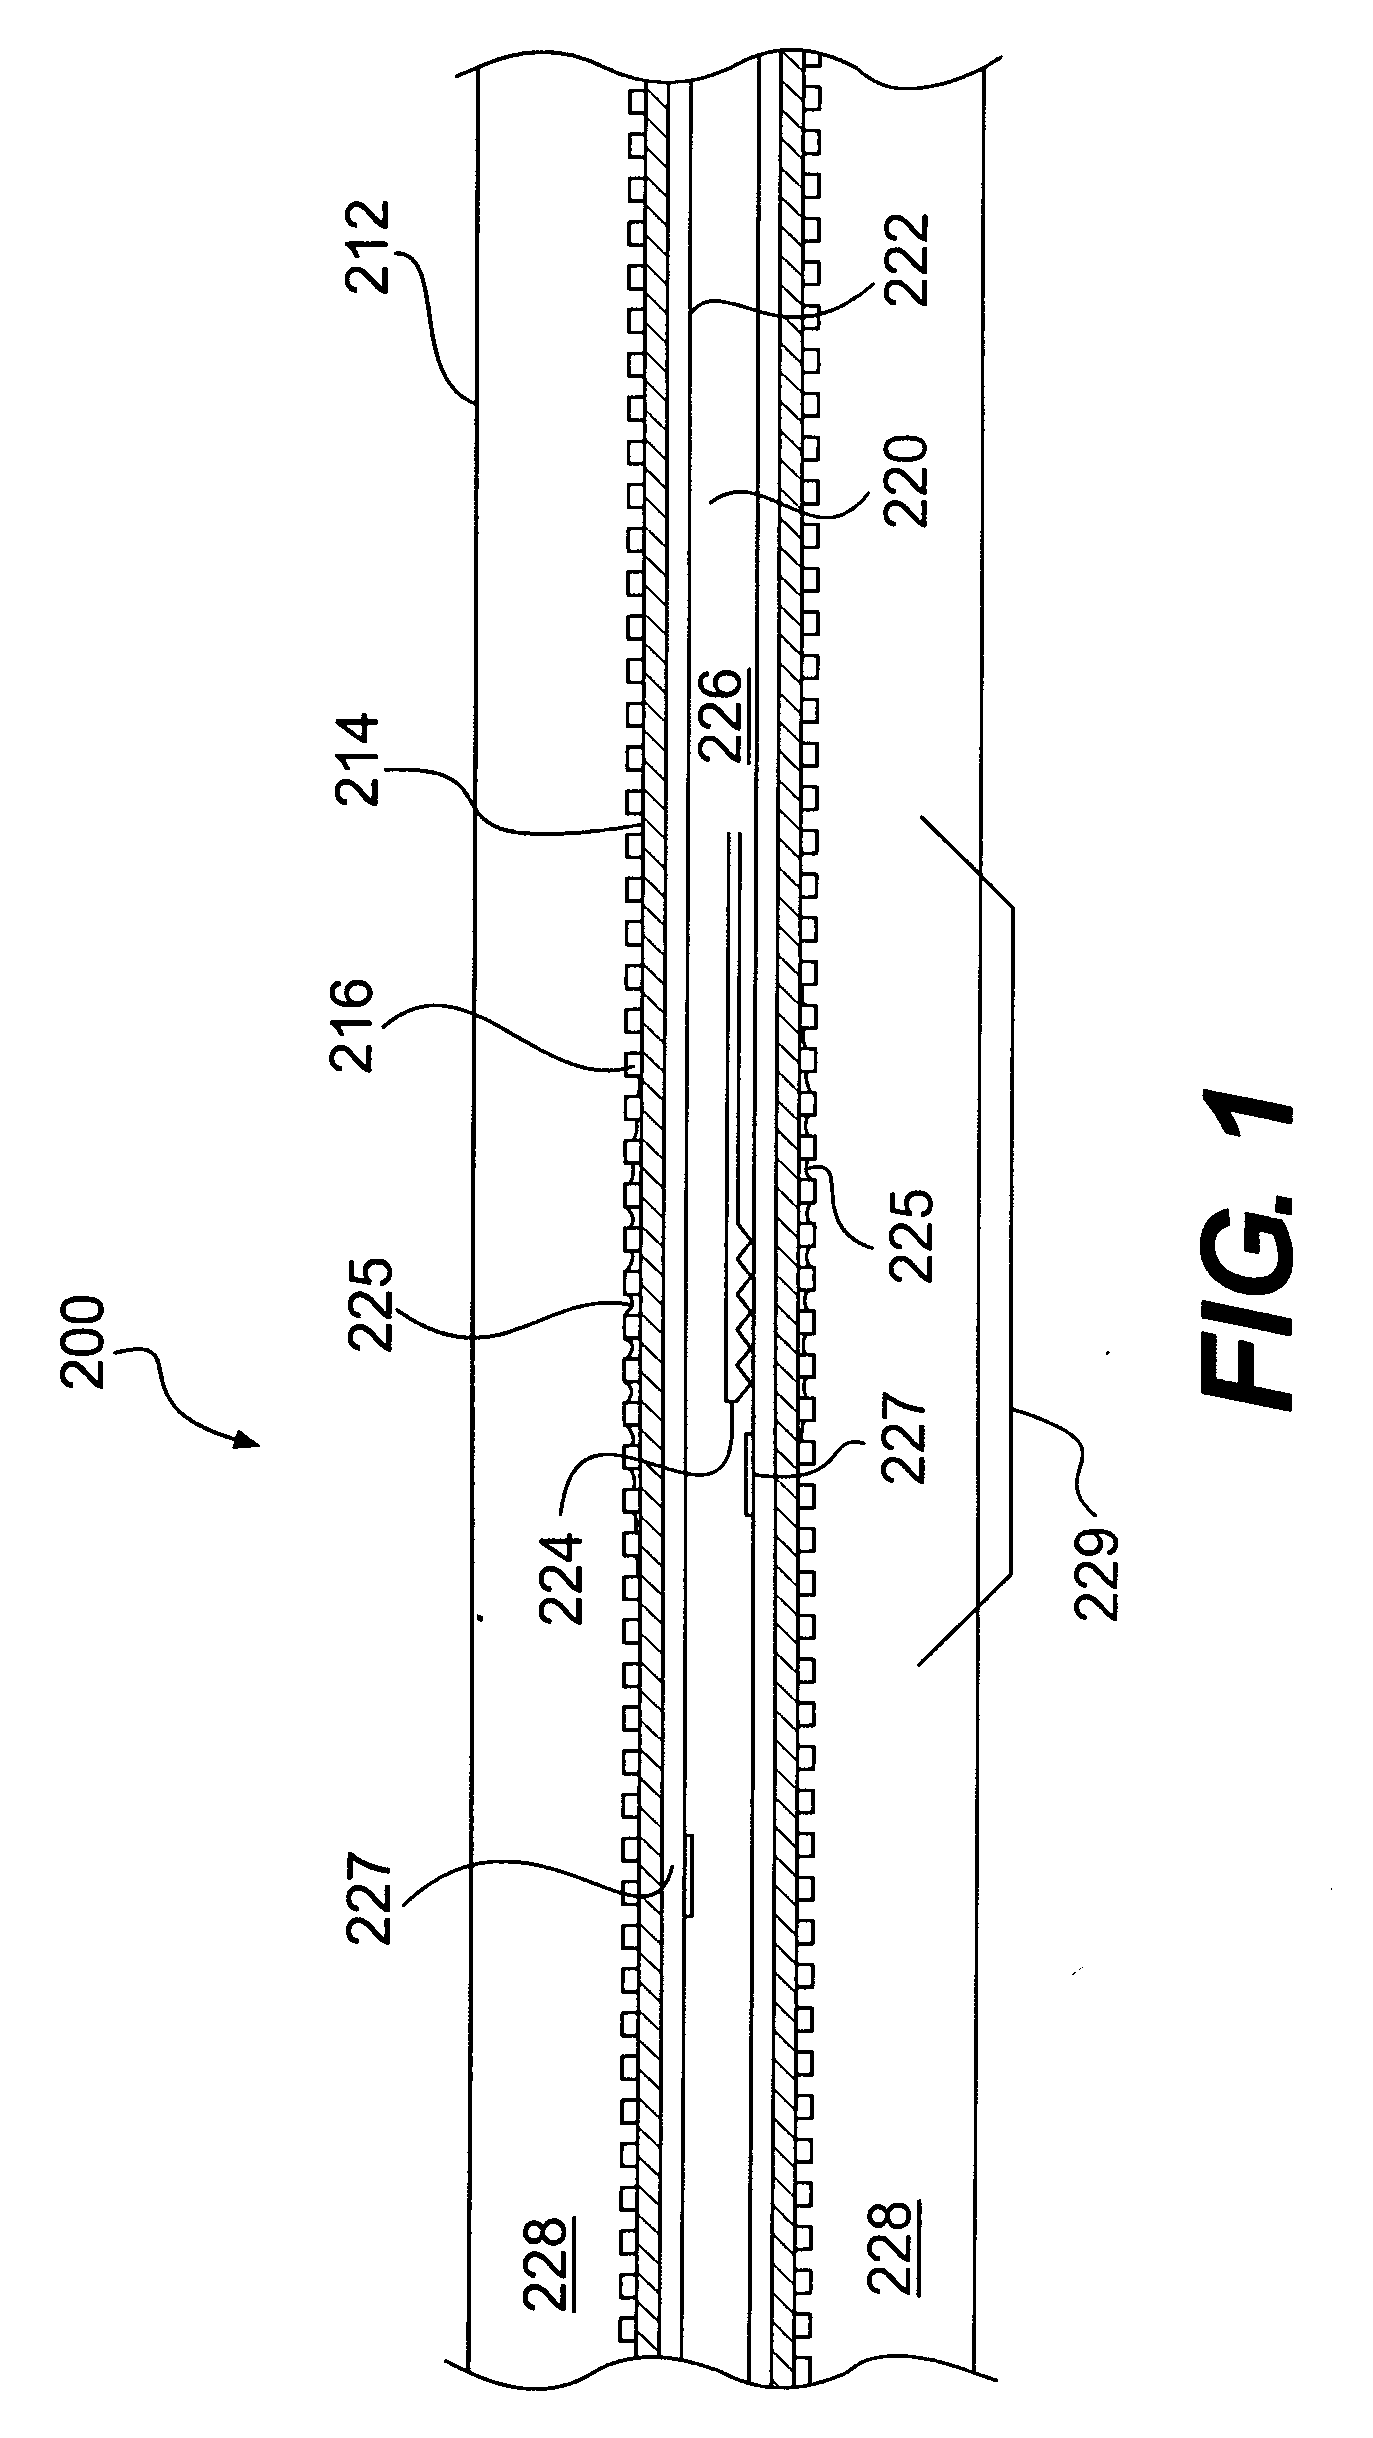 Apparatuses and systems for monitoring fouling of aqueous systems including enhanced heat exchanger tubes